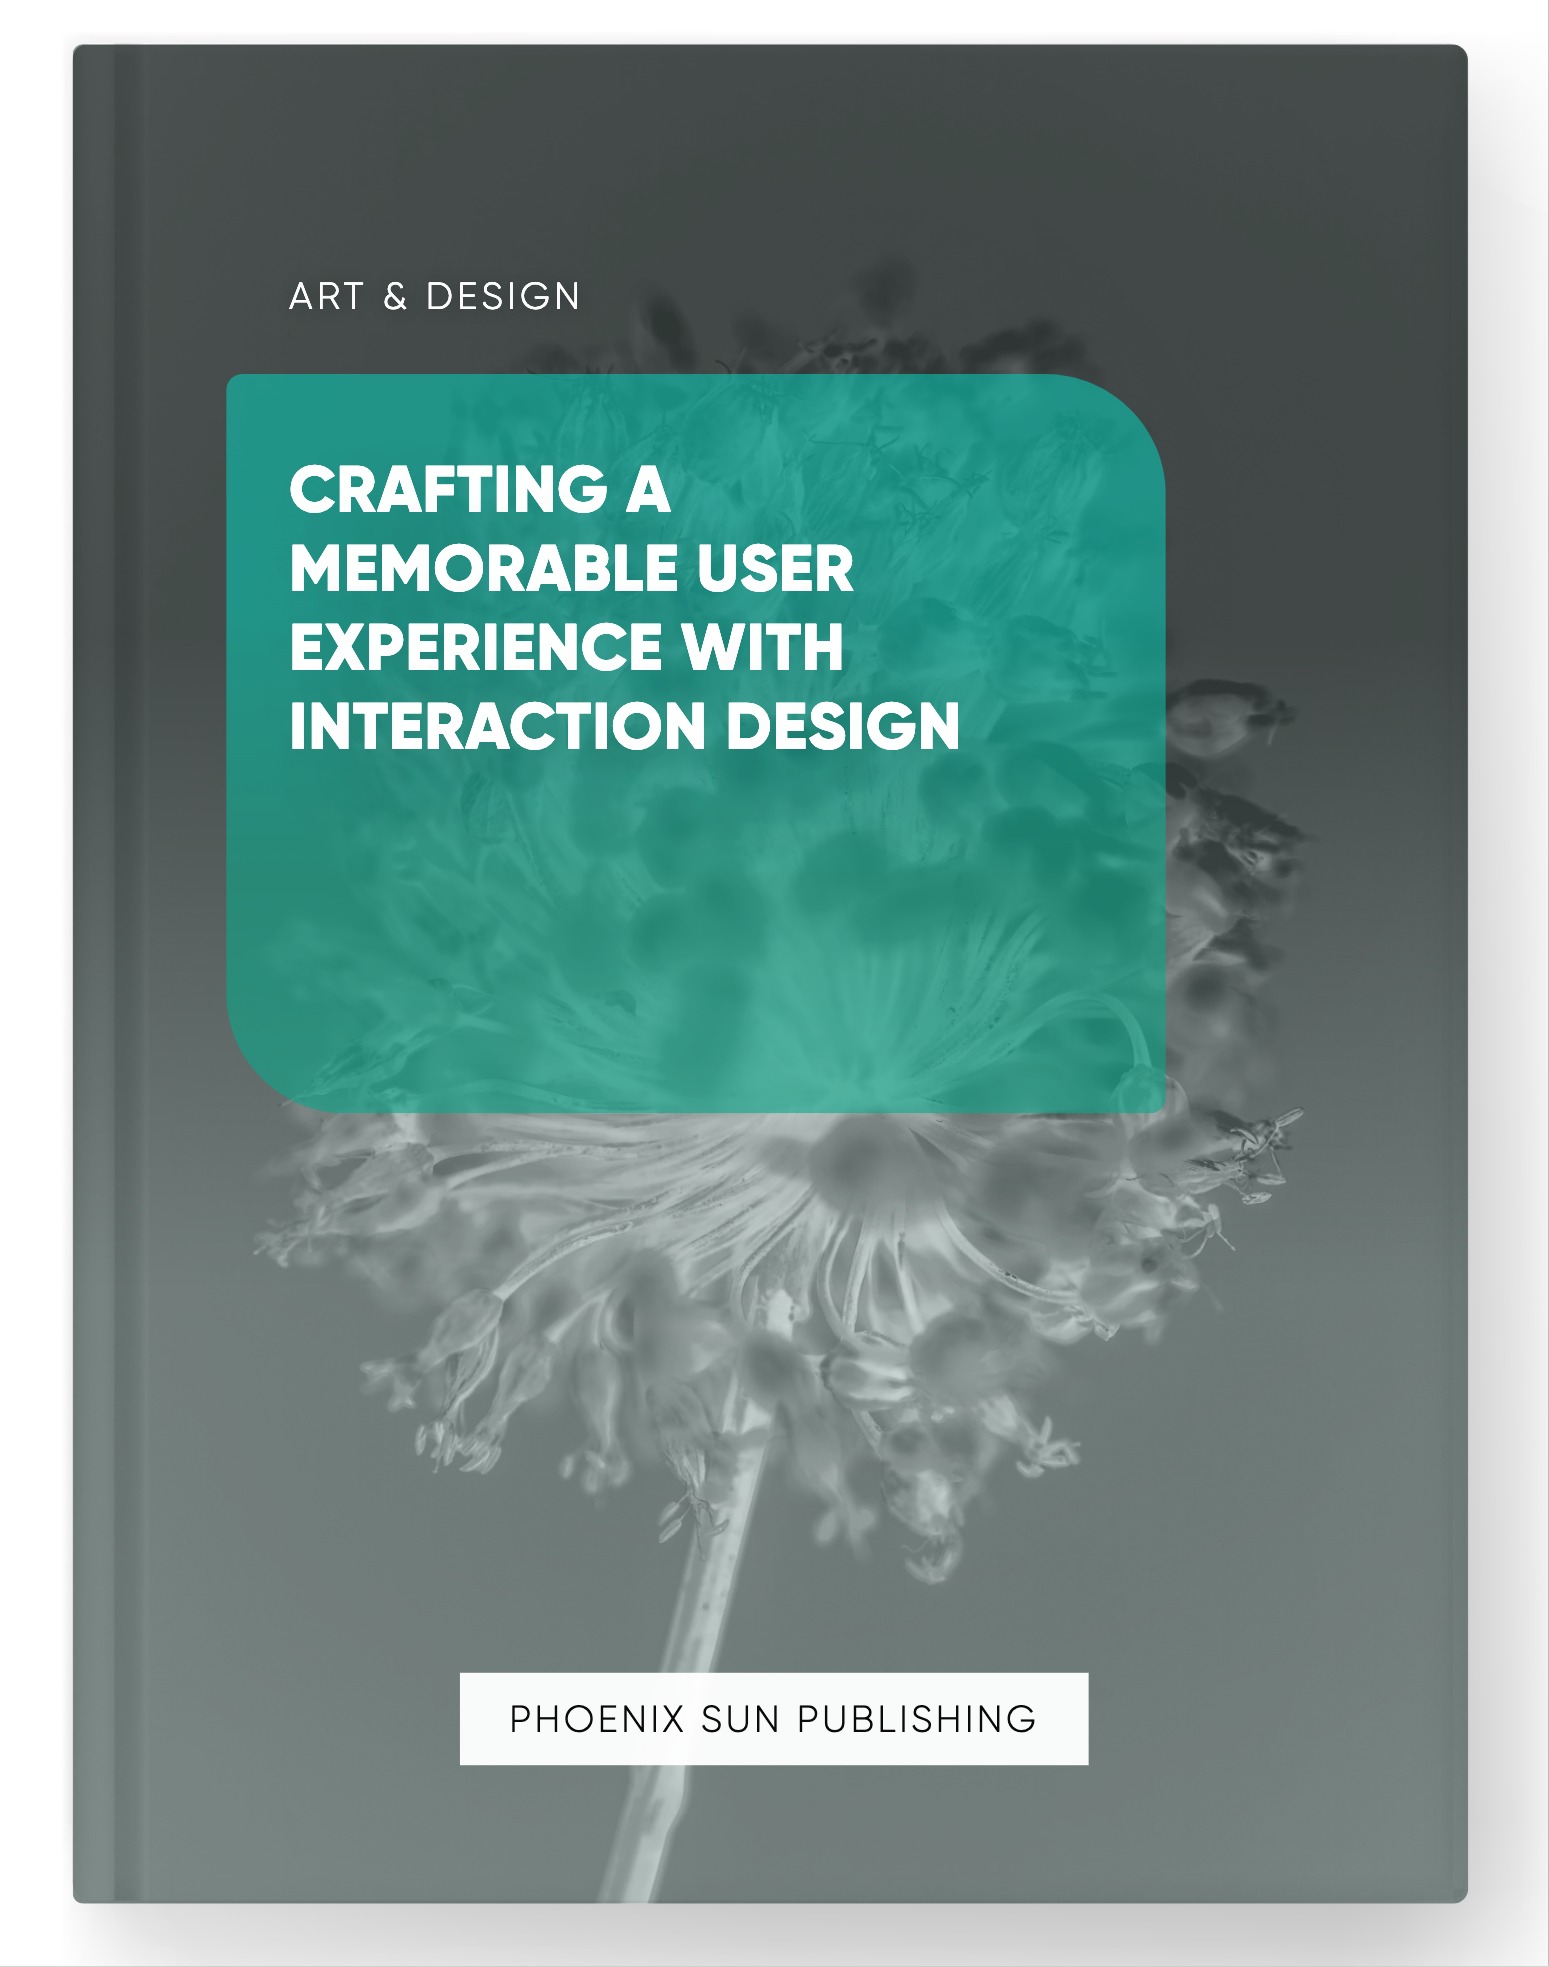 Crafting a Memorable User Experience with Interaction Design